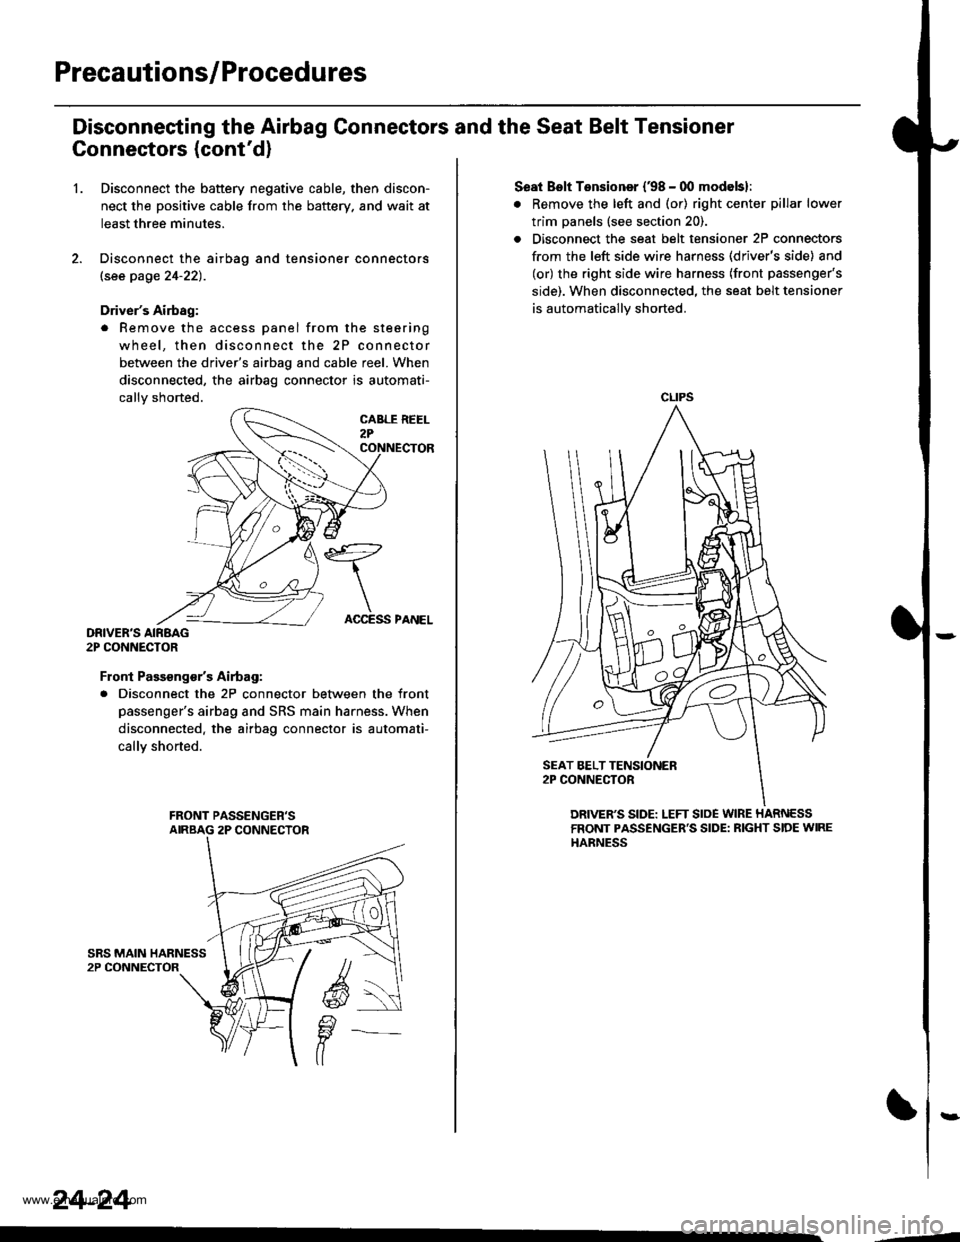 HONDA CR-V 1999 RD1-RD3 / 1.G Workshop Manual 
Precautions/Procedures
Disconneeting the Airbag Connectors and the Seat Belt Tensioner
Connectors (contd)
1.Disconnect the battery negative cable, then discon-
nect the positive cable from the batte